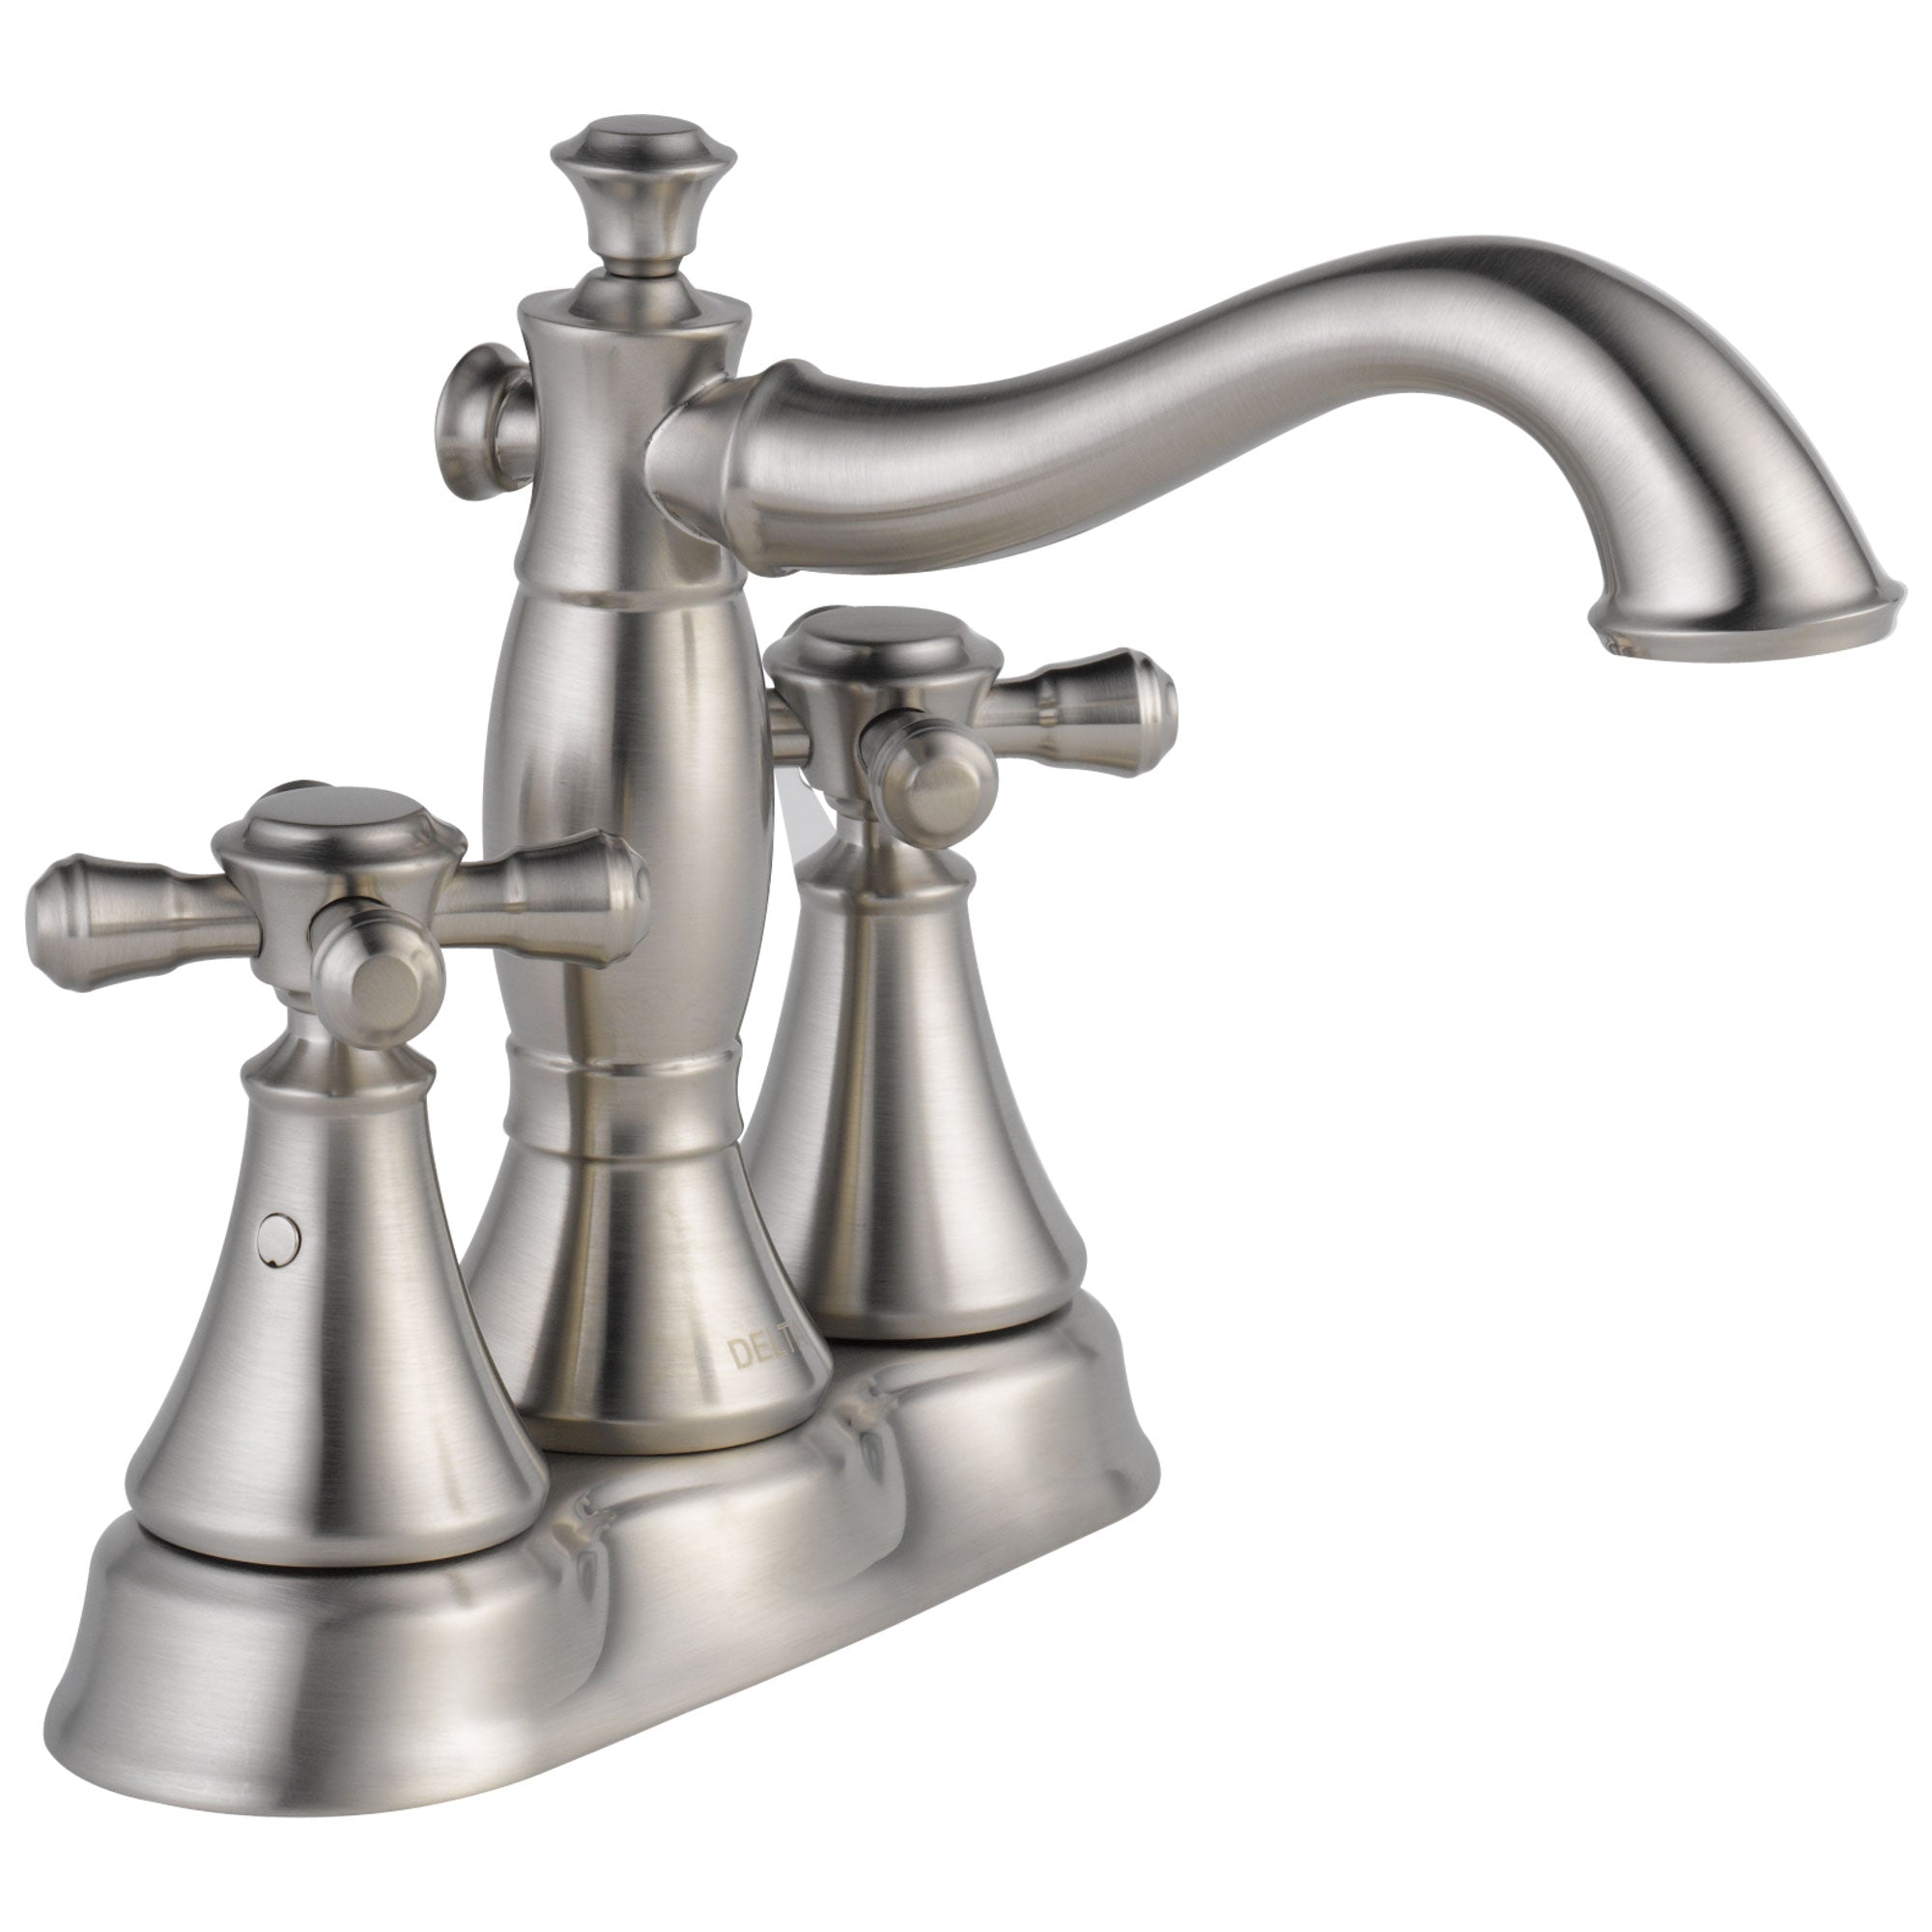 Delta Cassidy Collection Stainless Steel Finish Centerset Lavatory Bathroom Sink Faucet INCLUDES Two Cross Handles with Metal Pop-Up Drain D1896V